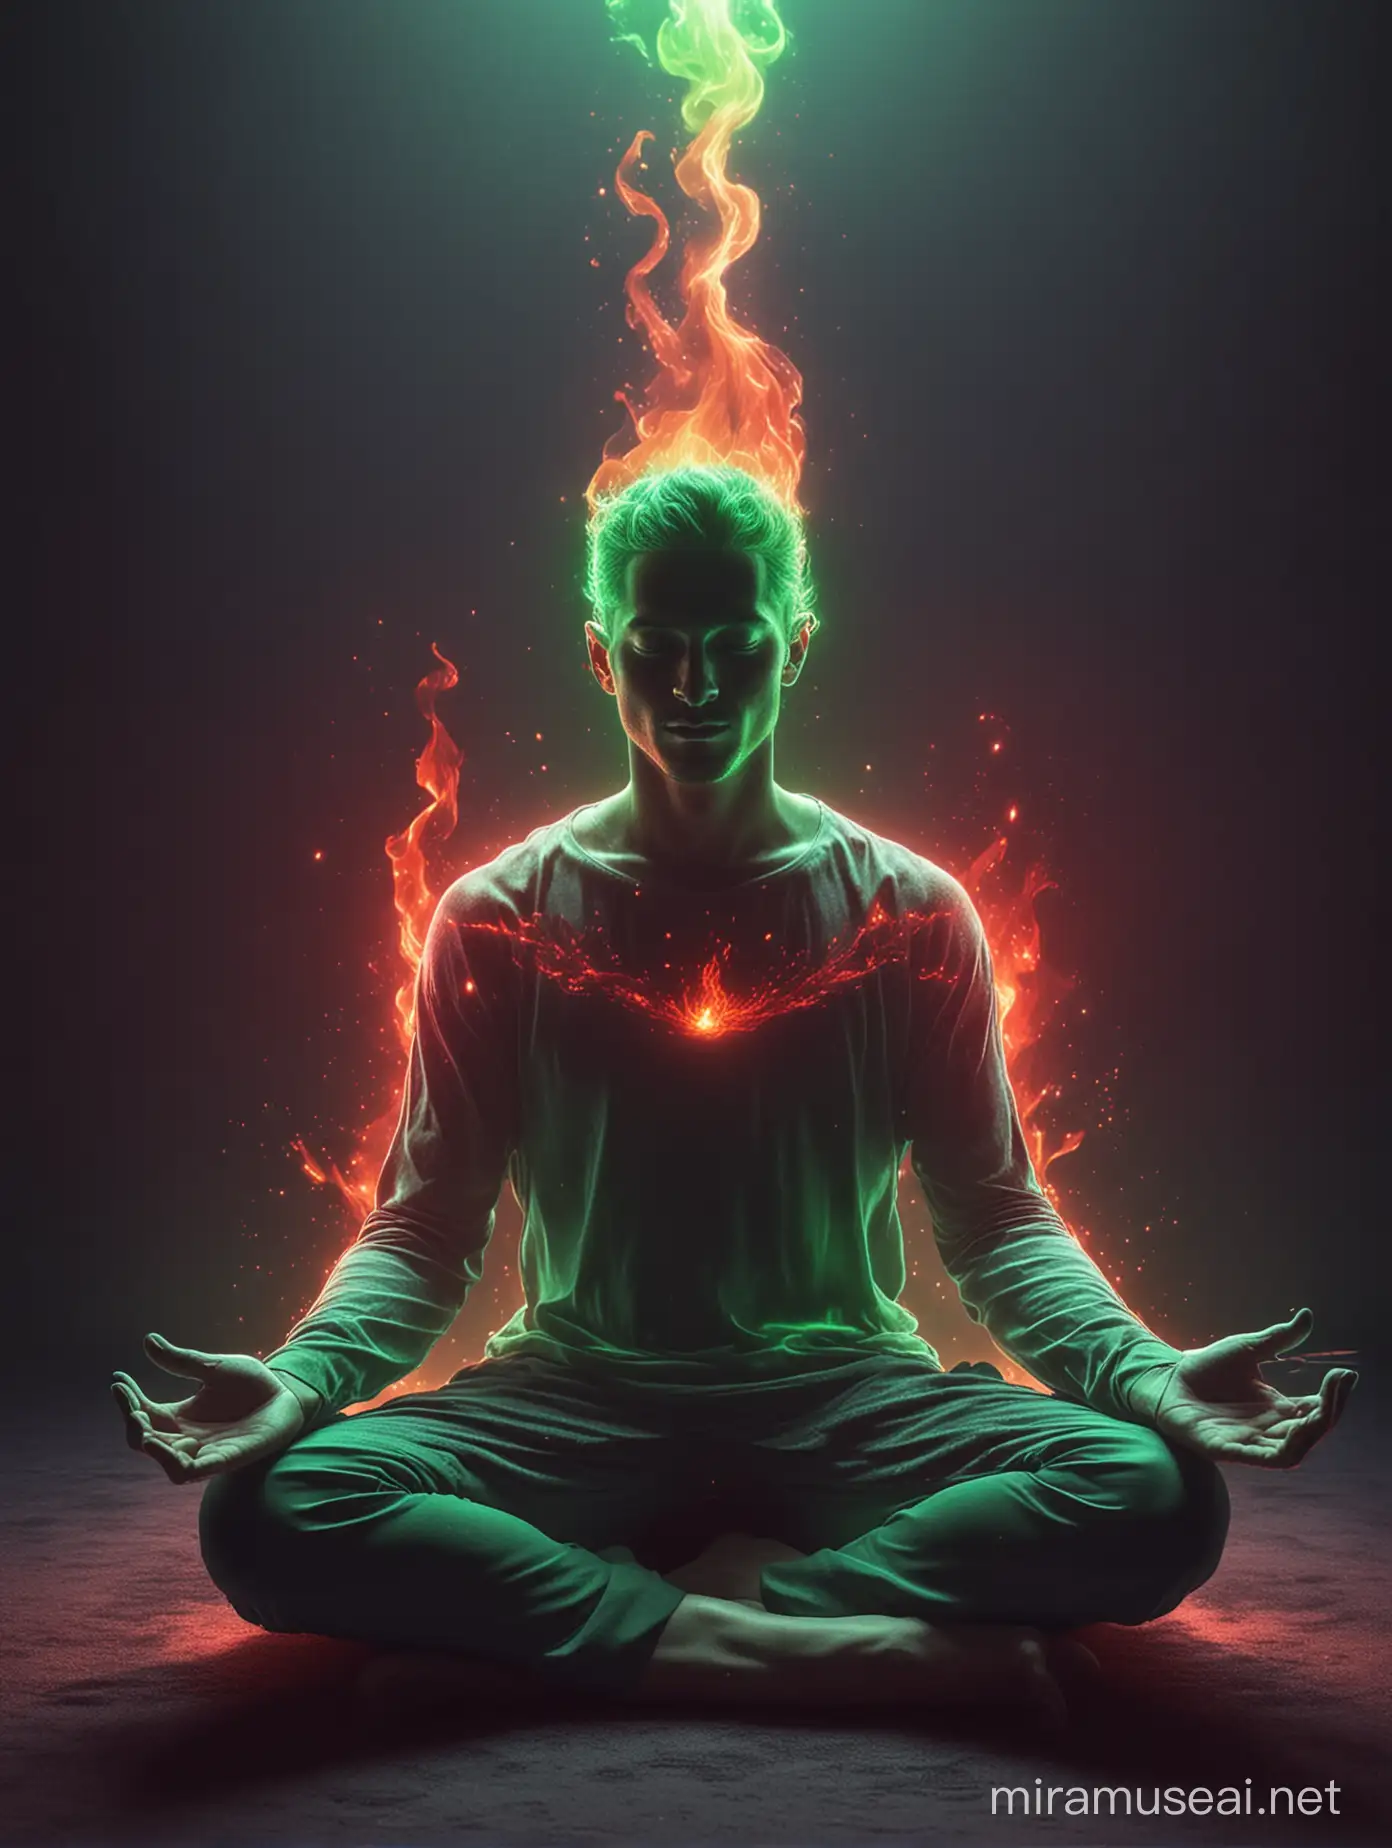 HOLOGRAPHIC transparent glowing man sitting down meditating, green fire on left hand, red fire on right hand, hd, 4k, vibrant gradient, deep color, glow